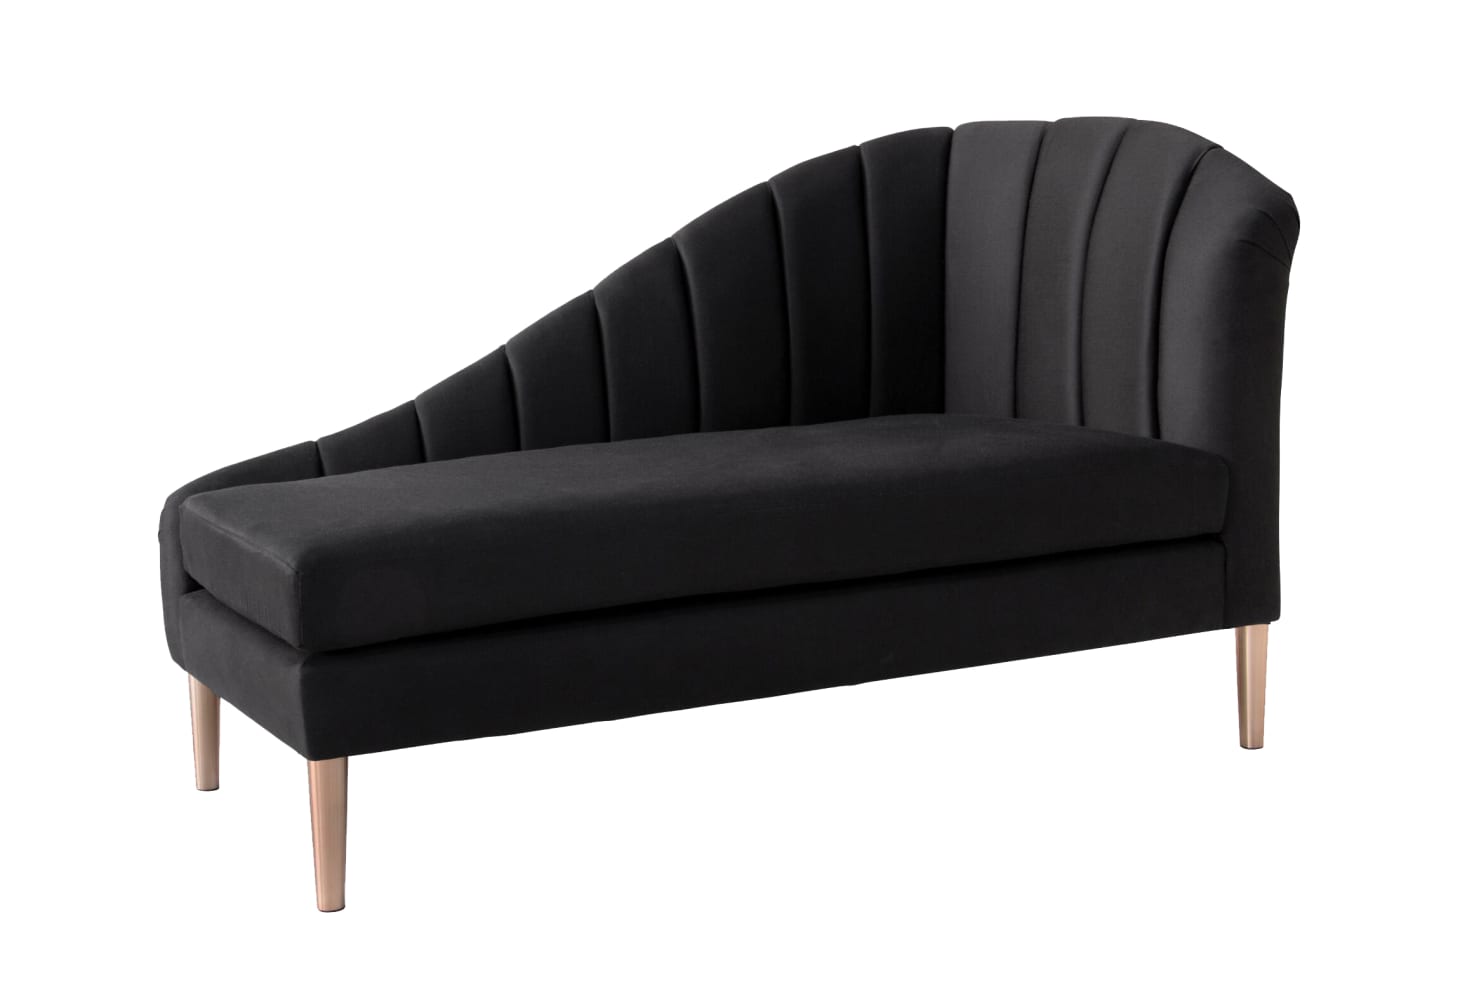 Trendy Chaise Lounges For Small Spaces From The 2020 SmallCool Experience Apartment Therapy